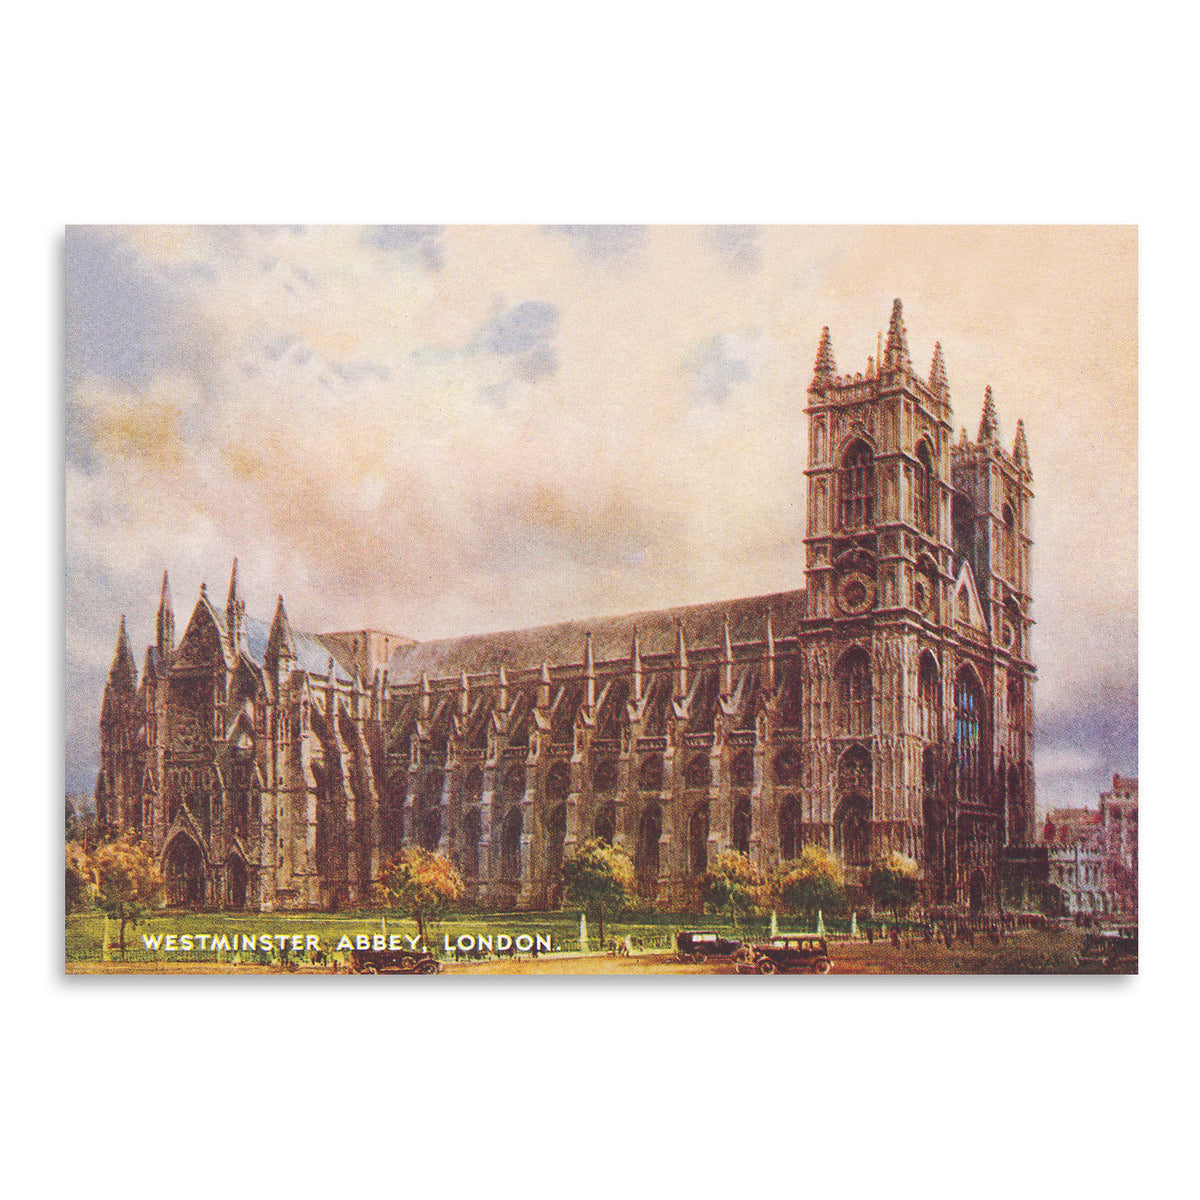 Westminster Abbey London by Found Image Press Art Print - Art Print - Americanflat